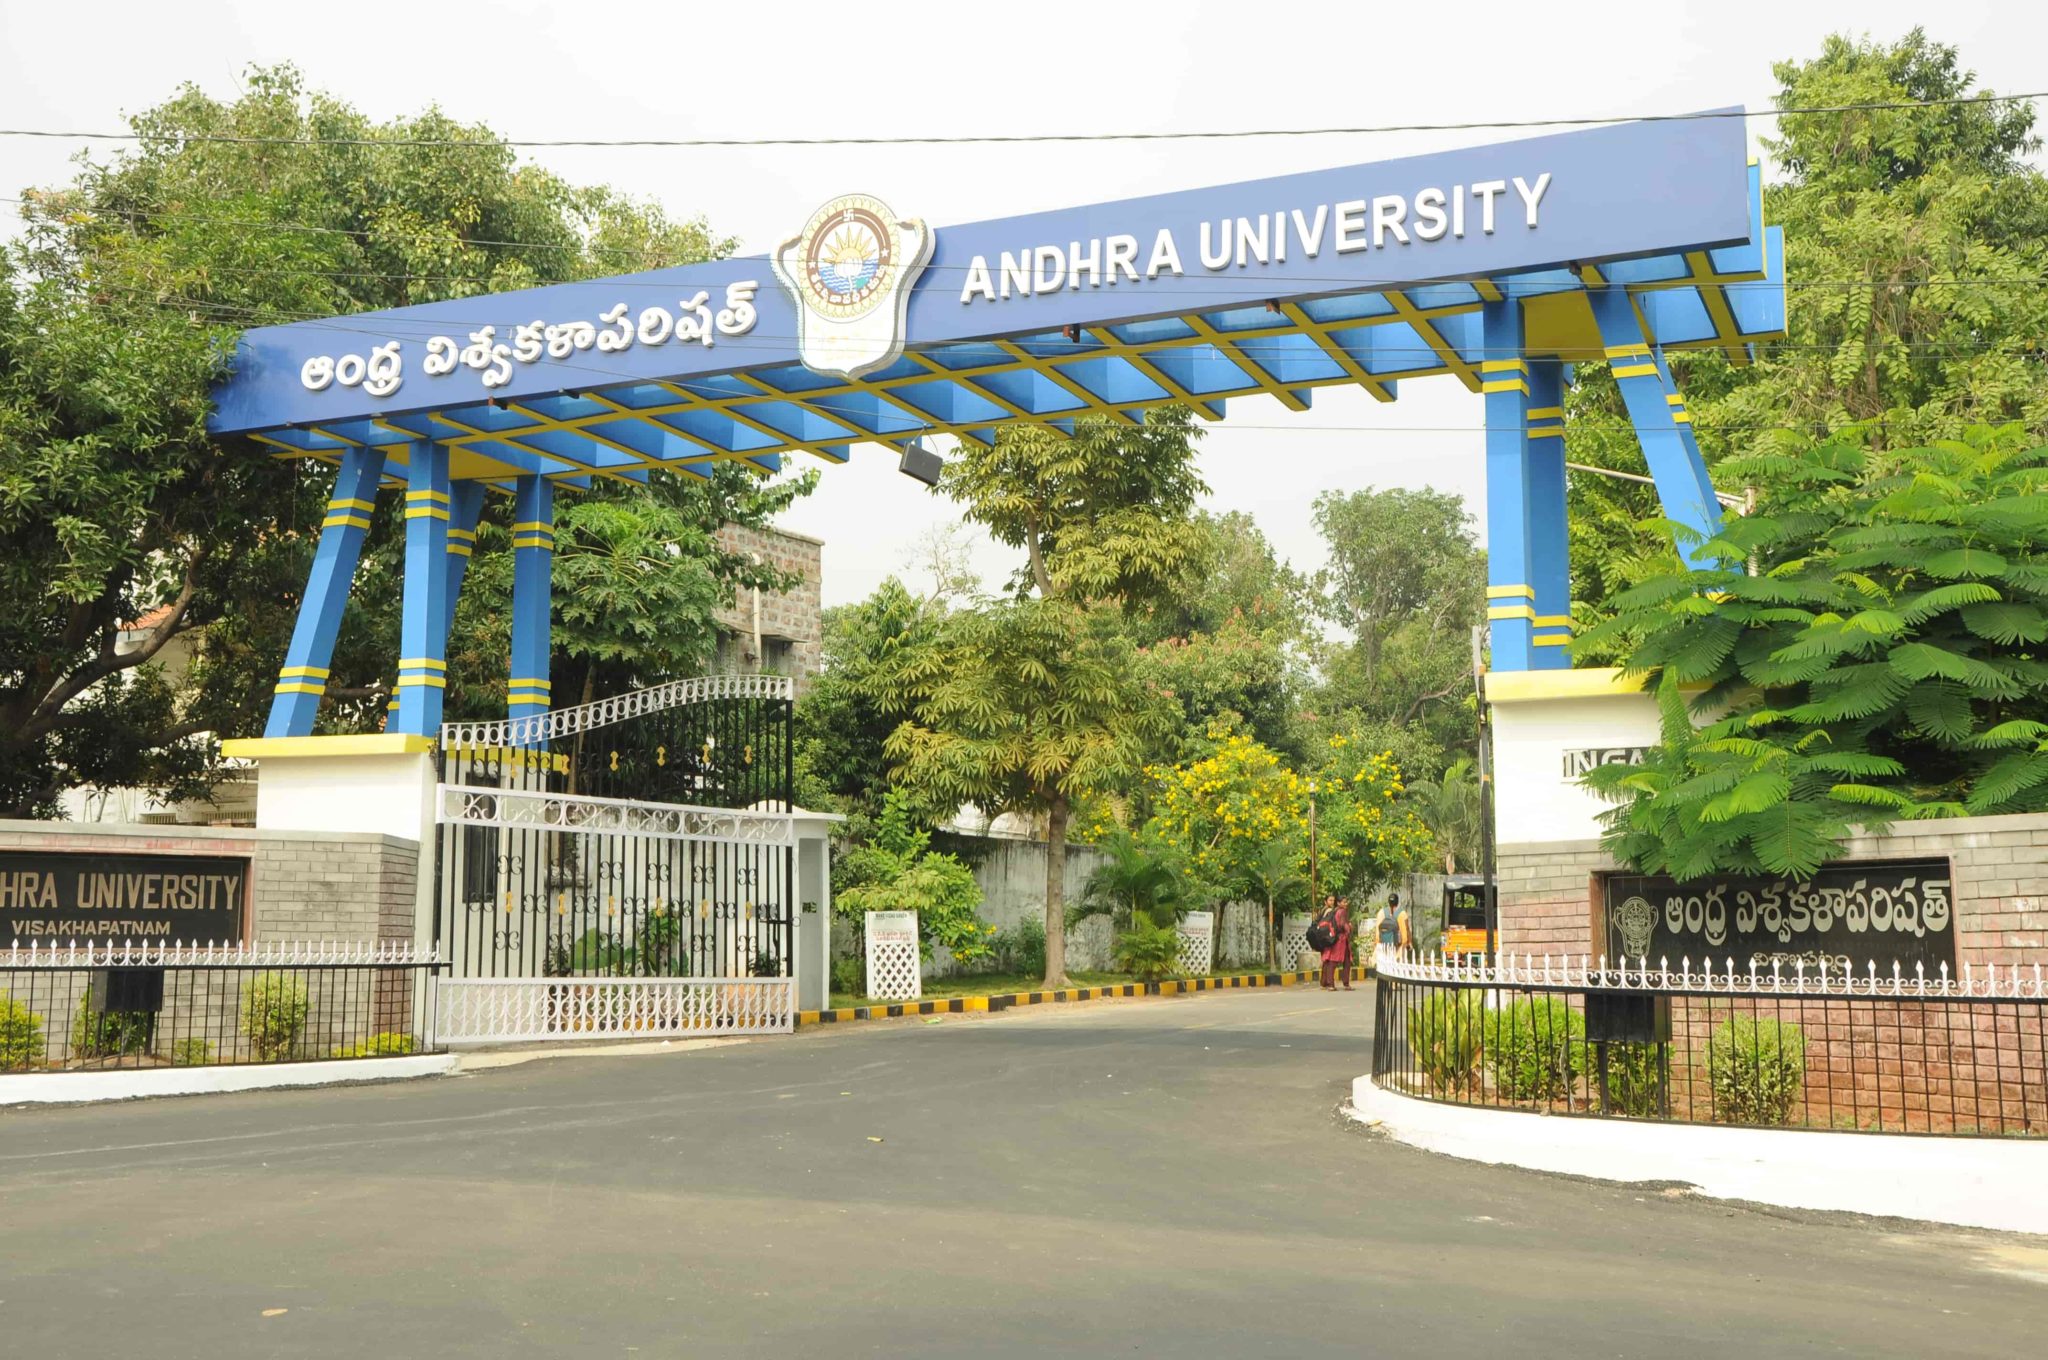 APRCET 2019: Andhra Pradesh Research Common Entrance Test 2019 for admission into PhD & MPhil in 14 Universities notification out